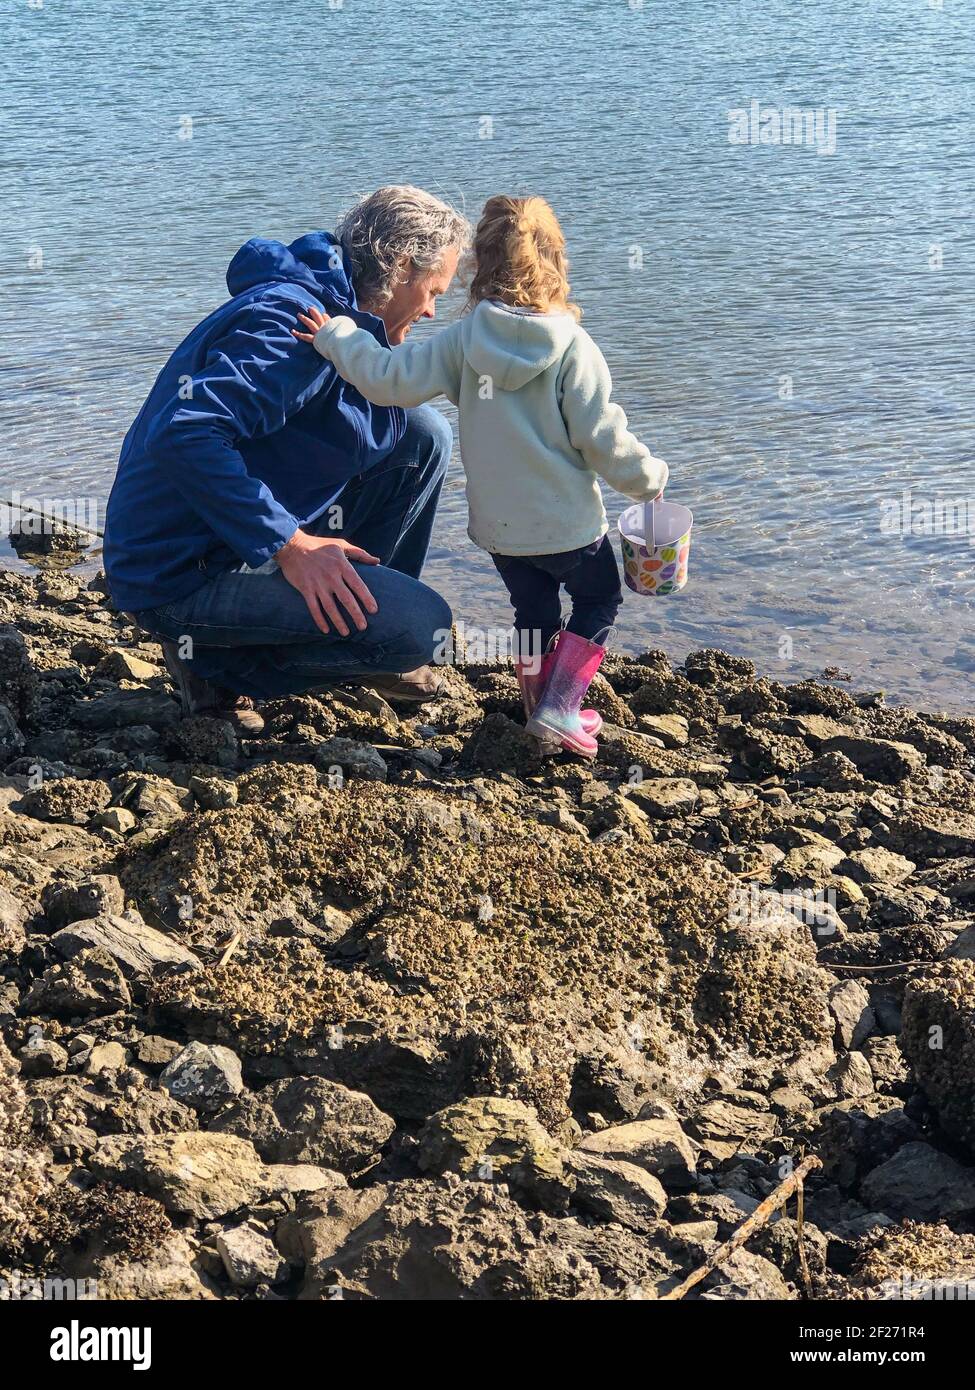 Grandfather and his small granddaughter on a rocky beach next to the water.  Beachcombing. Real people.  Family multi-generation leisure activities. Stock Photo